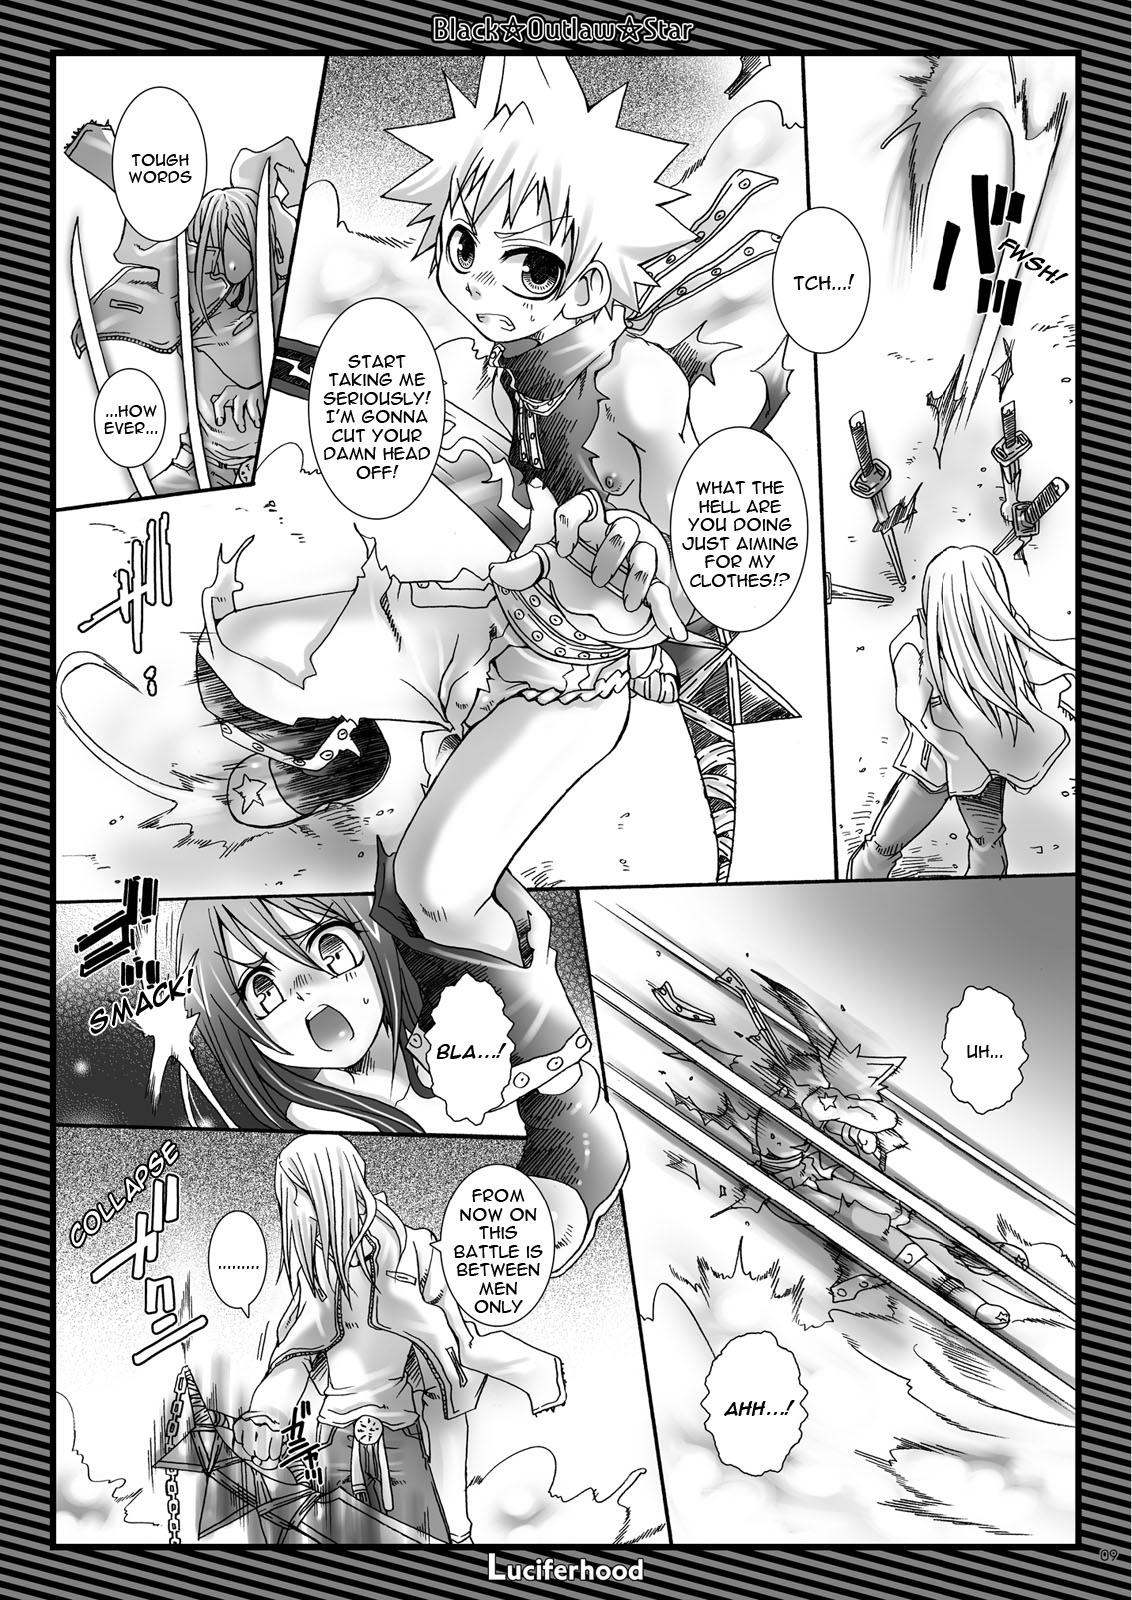 Gostosa Black Outlaw Star - Soul eater Hood - Page 7